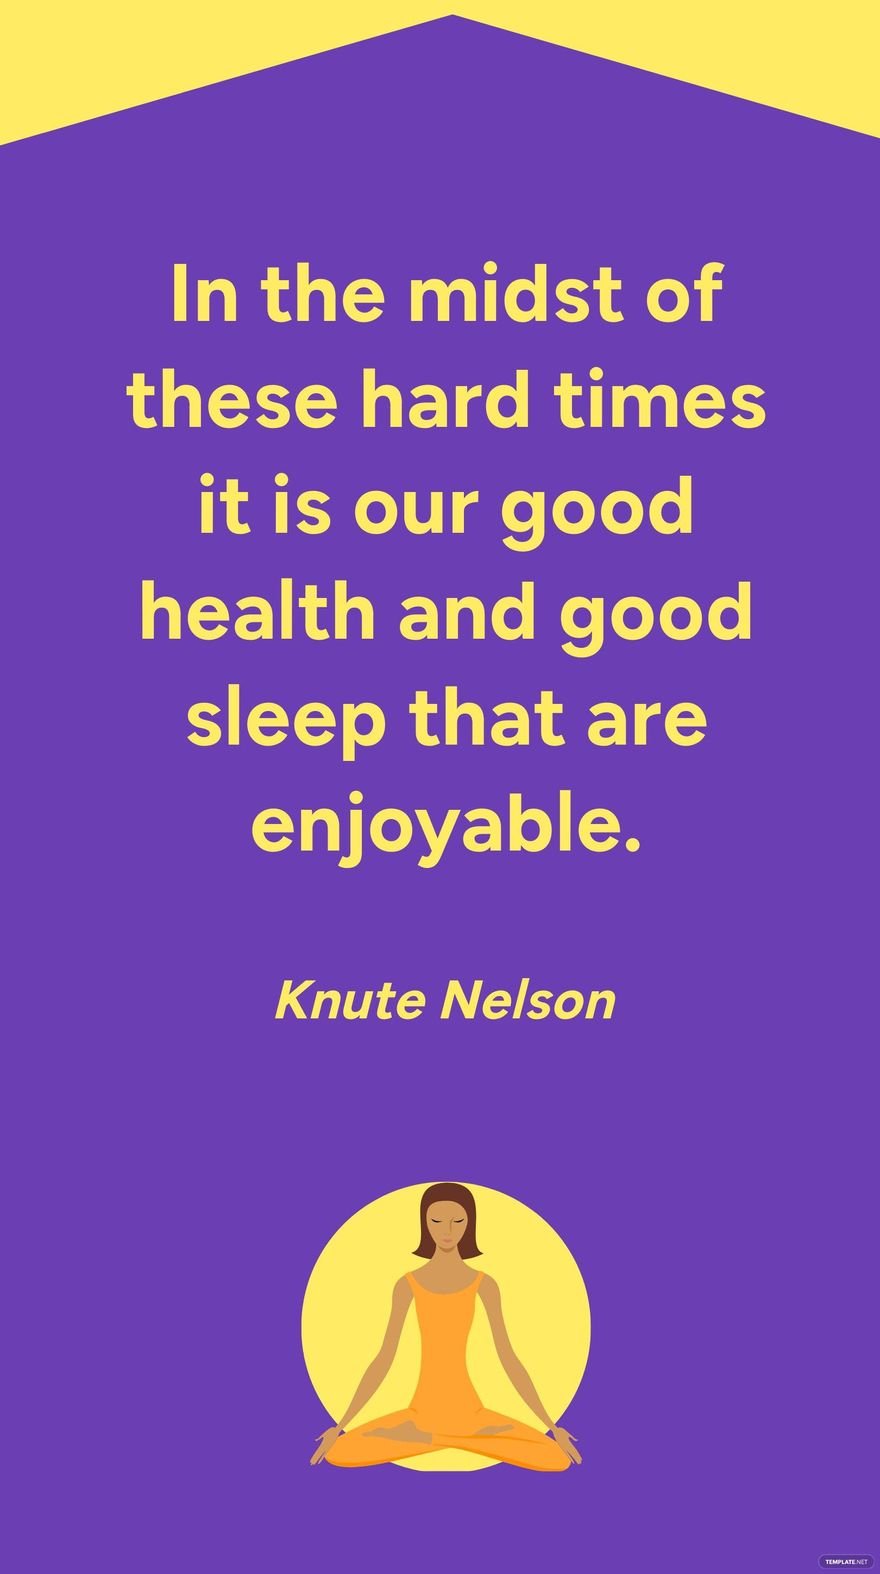 Knute Nelson - In the midst of these hard times it is our good health and good sleep that are enjoyable. in JPG